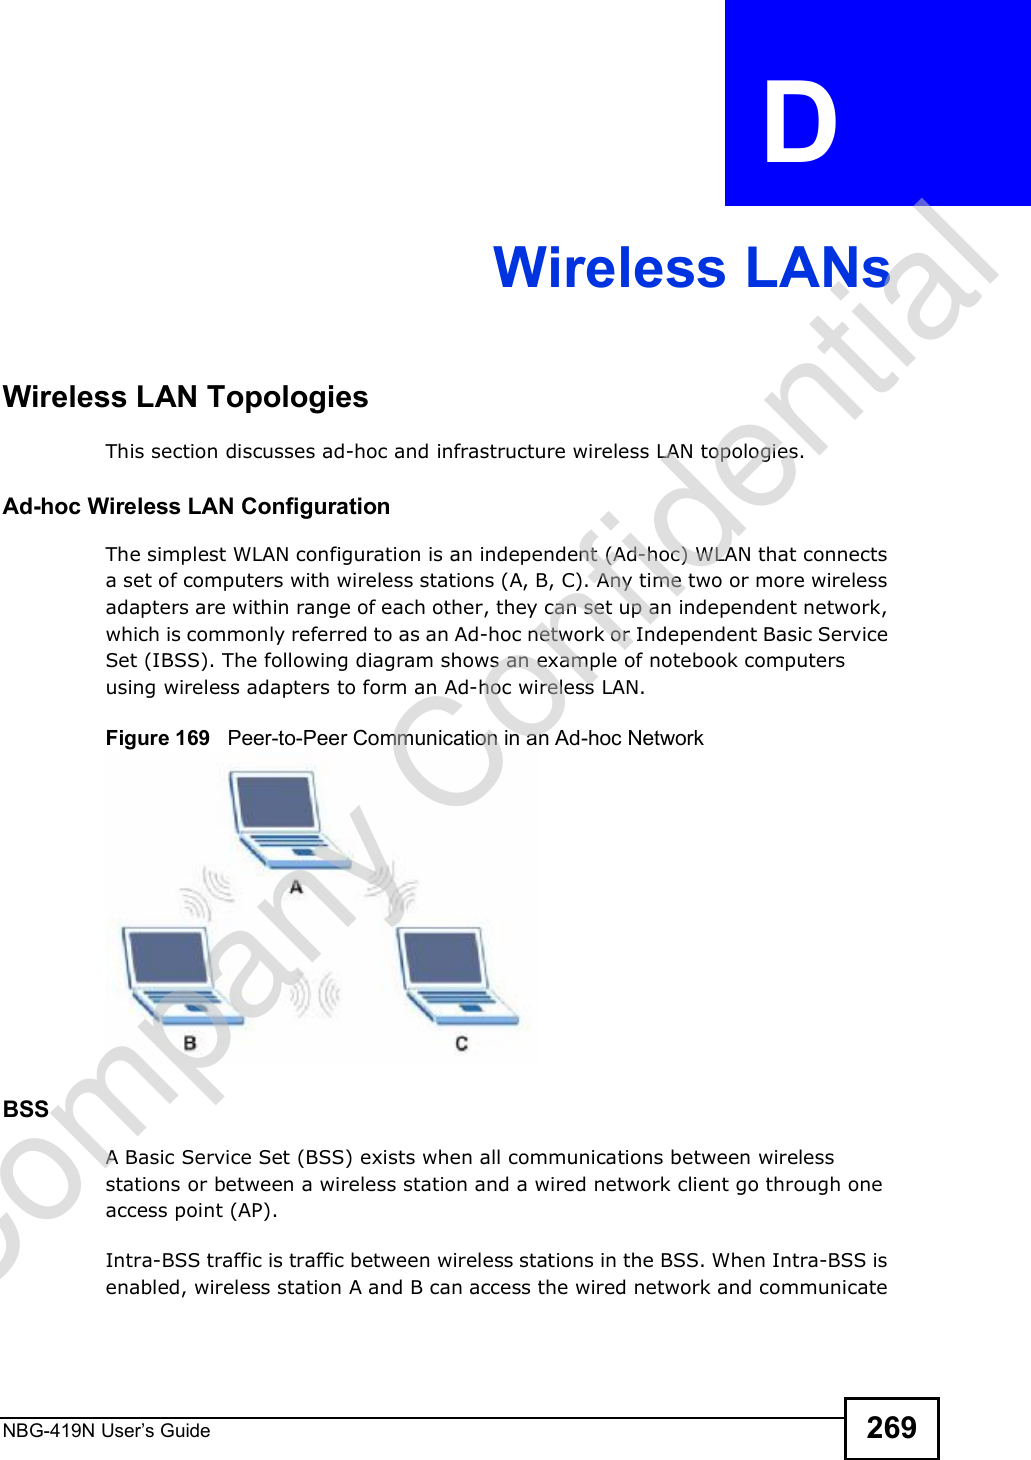 NBG-419N User s Guide 269APPENDIX  D Wireless LANsWireless LAN TopologiesThis section discusses ad-hoc and infrastructure wireless LAN topologies.Ad-hoc Wireless LAN ConfigurationThe simplest WLAN configuration is an independent (Ad-hoc) WLAN that connects a set of computers with wireless stations (A, B, C). Any time two or more wireless adapters are within range of each other, they can set up an independent network, which is commonly referred to as an Ad-hoc network or Independent Basic Service Set (IBSS). The following diagram shows an example of notebook computers using wireless adapters to form an Ad-hoc wireless LAN. Figure 169   Peer-to-Peer Communication in an Ad-hoc NetworkBSSA Basic Service Set (BSS) exists when all communications between wireless stations or between a wireless station and a wired network client go through one access point (AP). Intra-BSS traffic is traffic between wireless stations in the BSS. When Intra-BSS is enabled, wireless station A and B can access the wired network and communicate Company Confidential